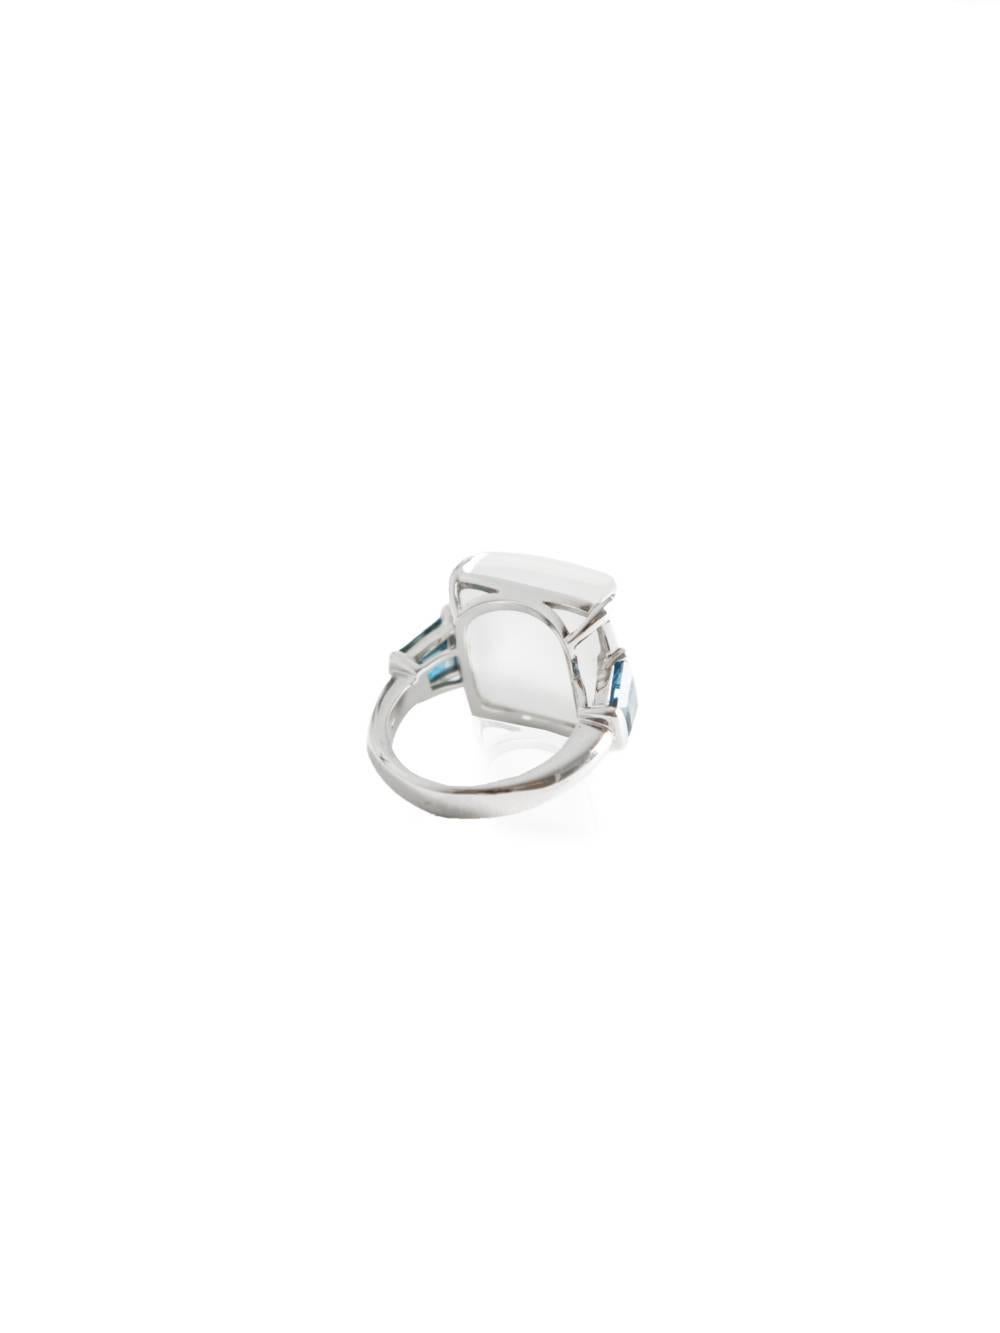  Moonstone Topaz White Gold Ring by Opera, Italian Attitude In New Condition For Sale In Milano, IT